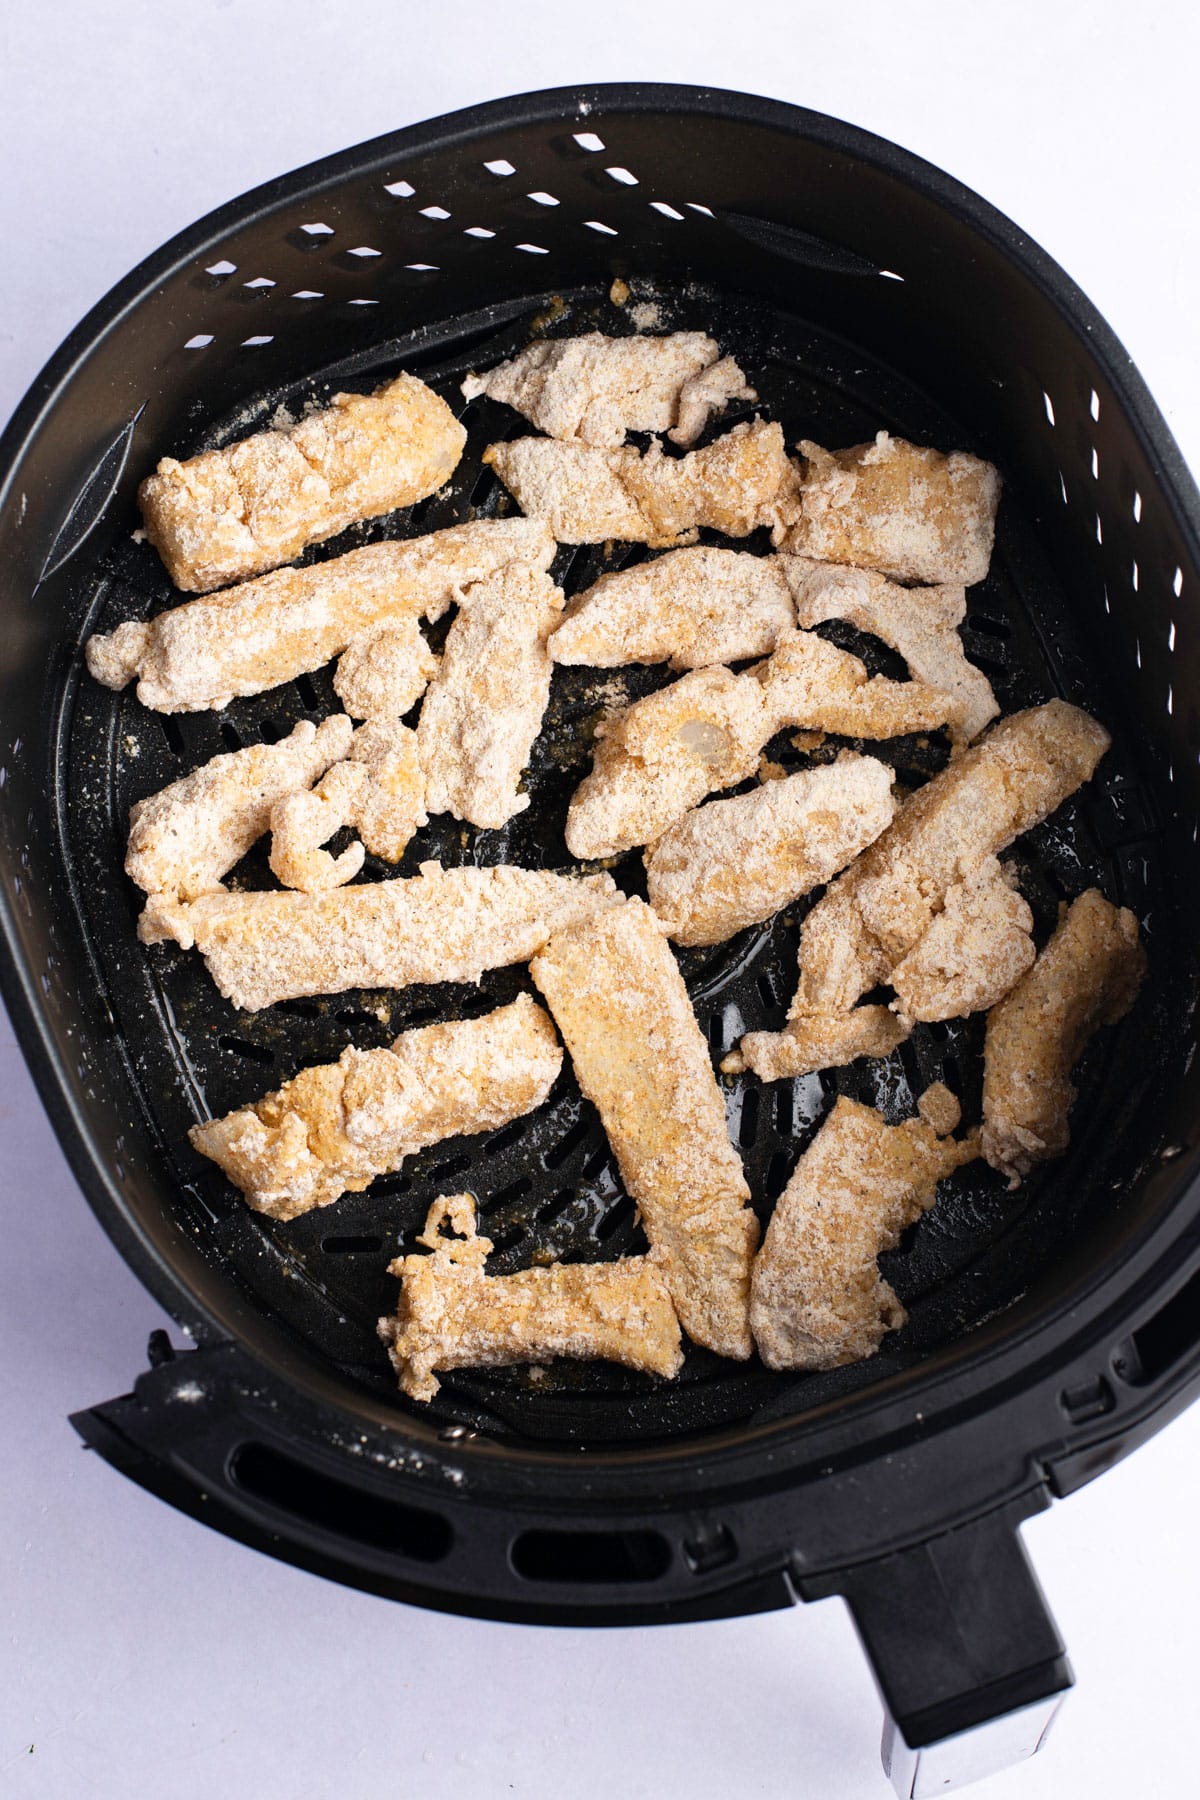 Breaded fish in the air fryer basket before being cooked.